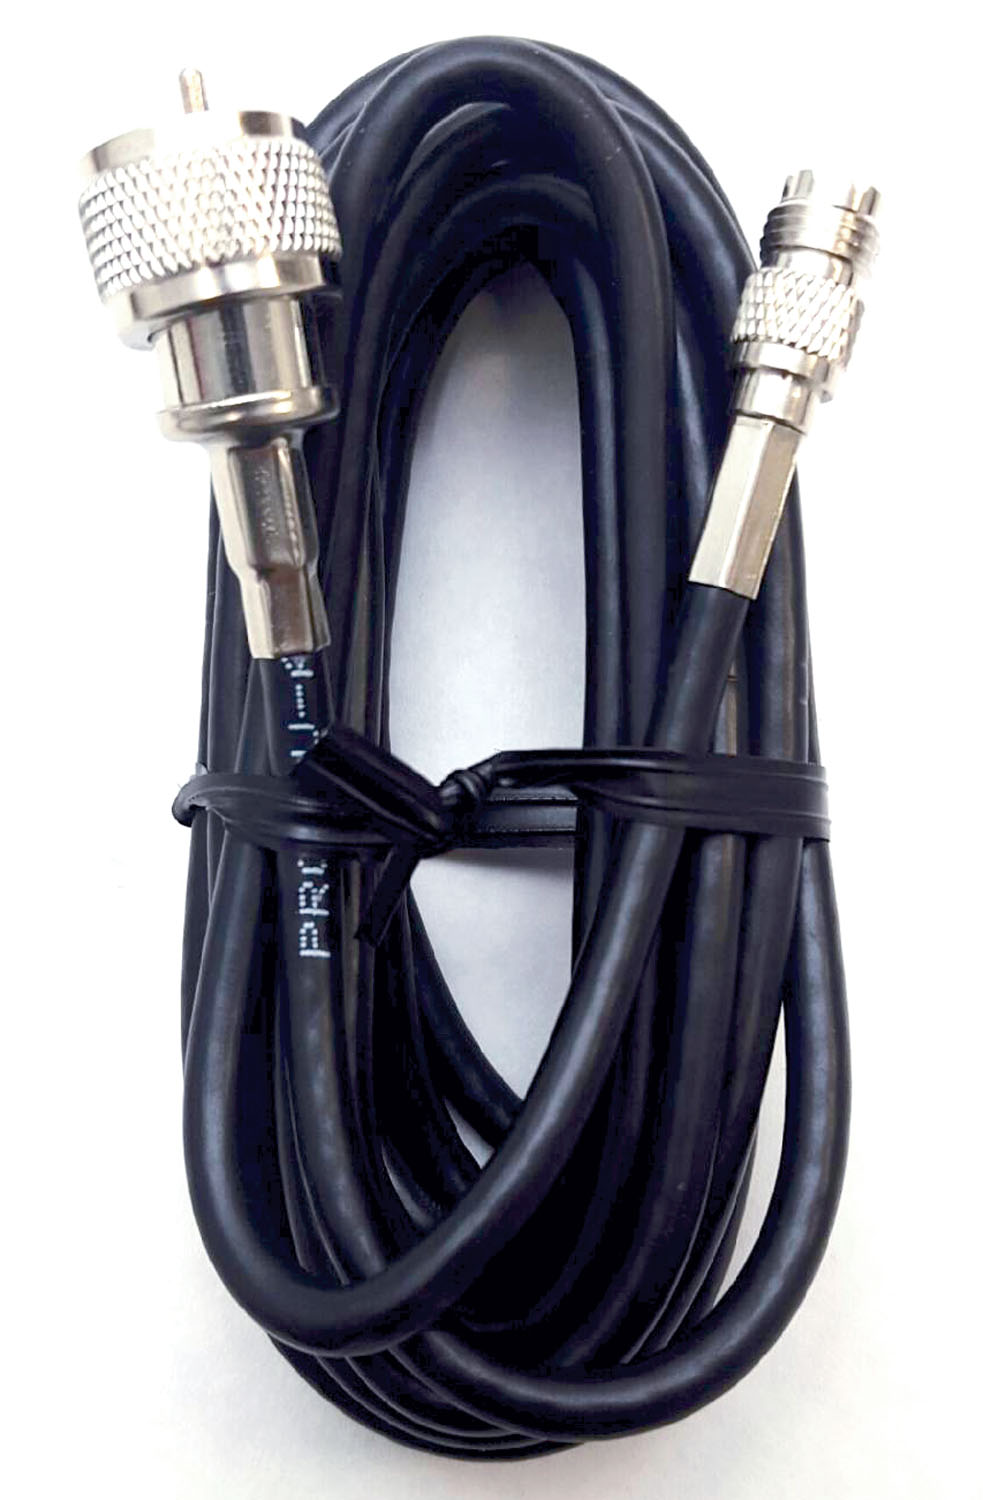 Procomm- 9 Foot Single Lead Rg58 Coaxial Cable With Pl259 Connector On One End And And Mini Uhf Female Connector On Other End